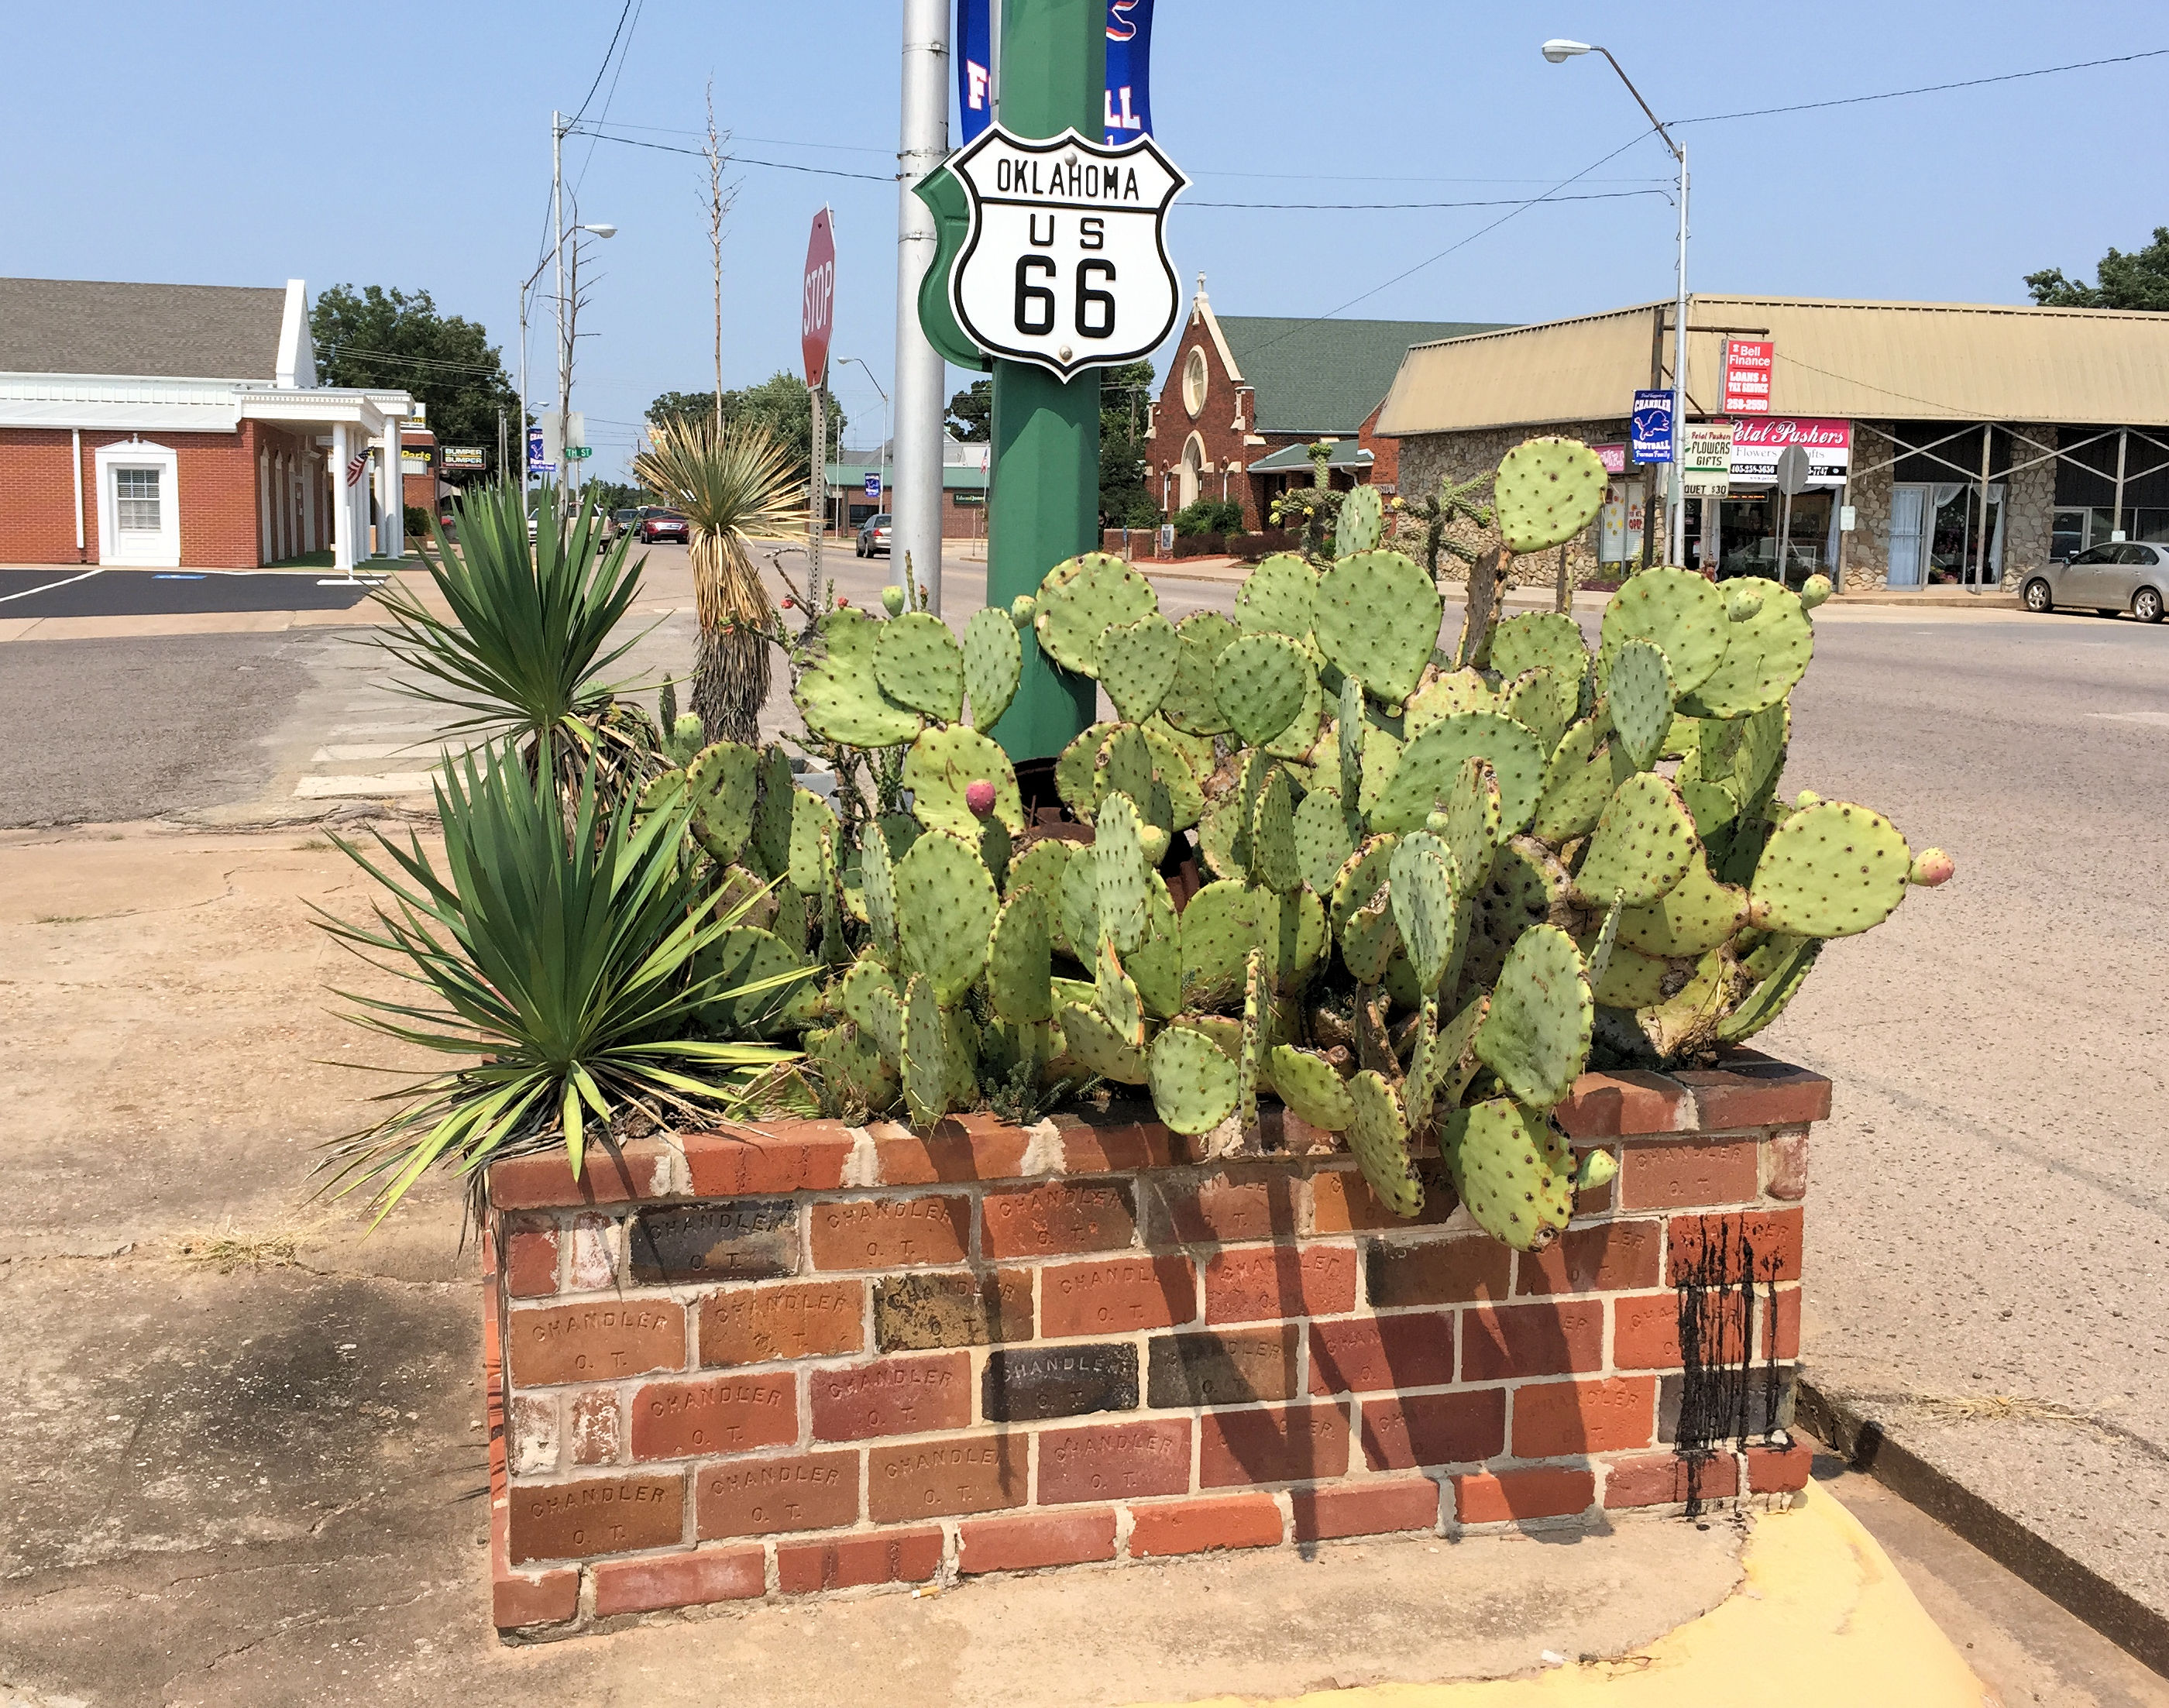 a US Route 66 road sign in Oklahoma by a display of cacti